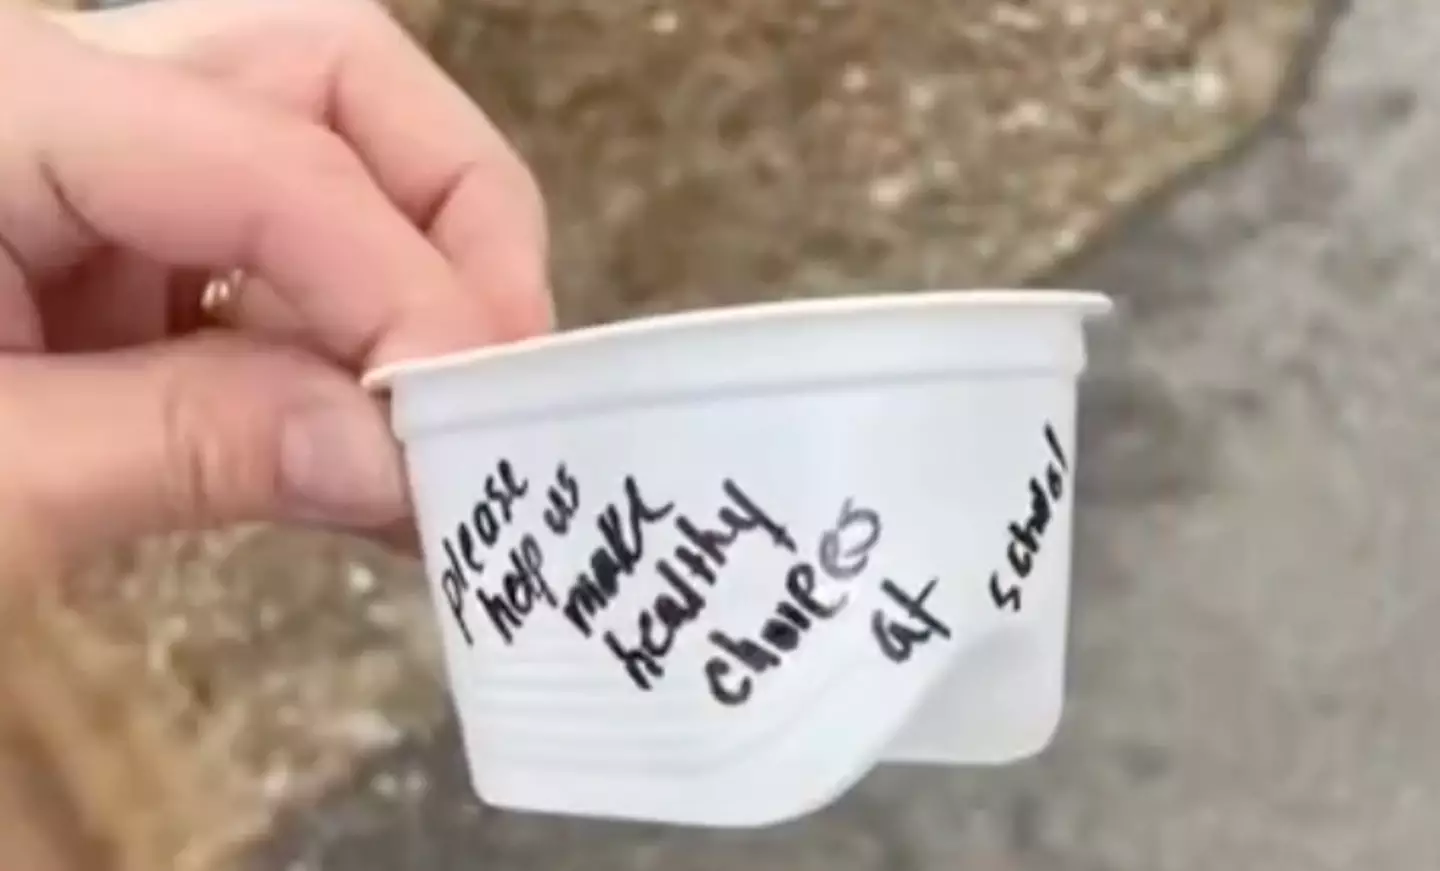 The note was written on the cup Megan had given her son.